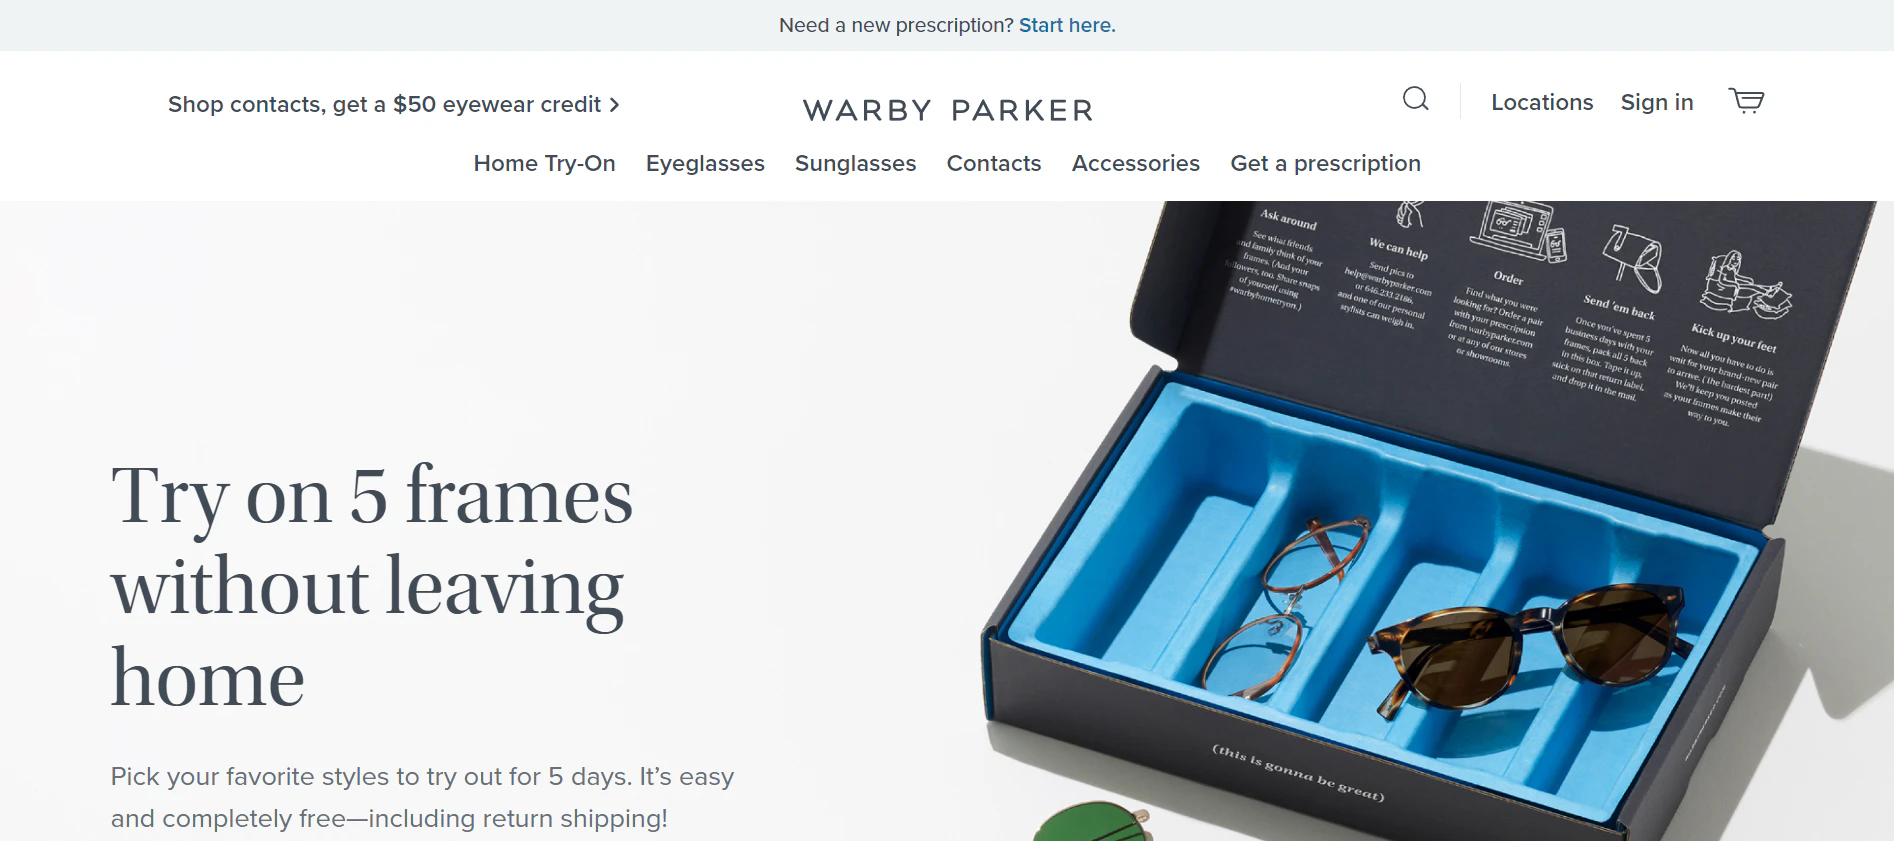 warby parker has solid product photography